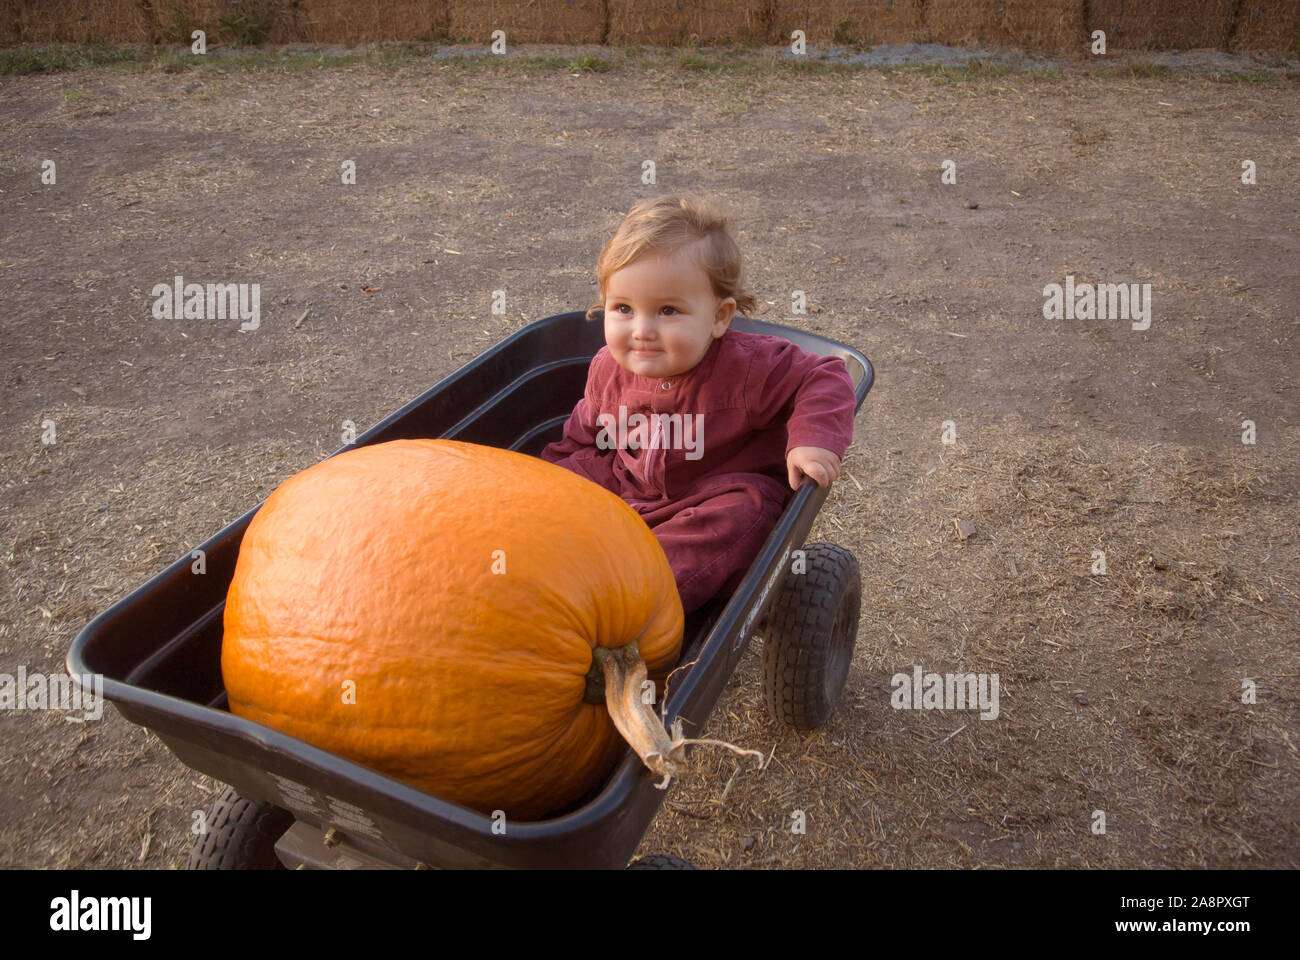 A baby grins while sitting in a cart with a giant pumpkin. Stock Photo